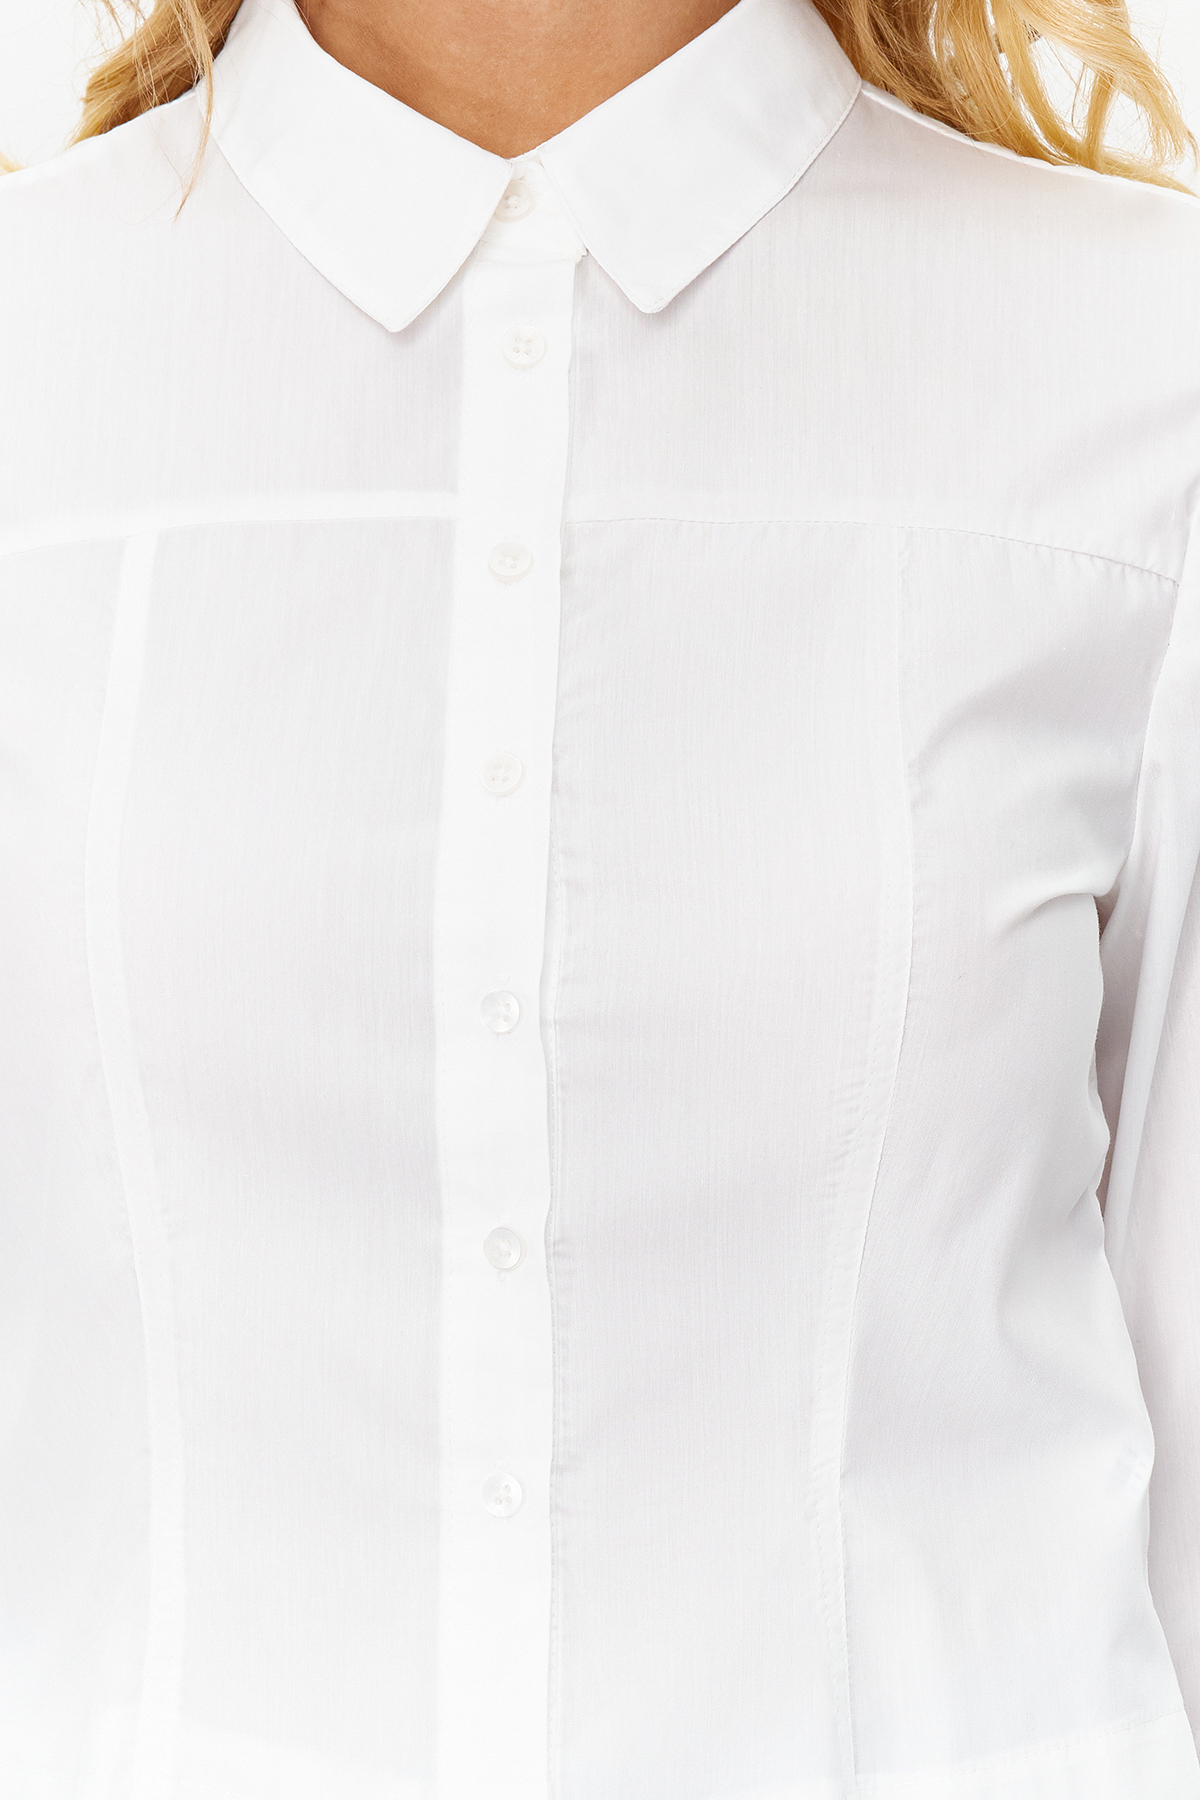 Trendyol Ecru Fitted/Waist-fitted Woven Shirt